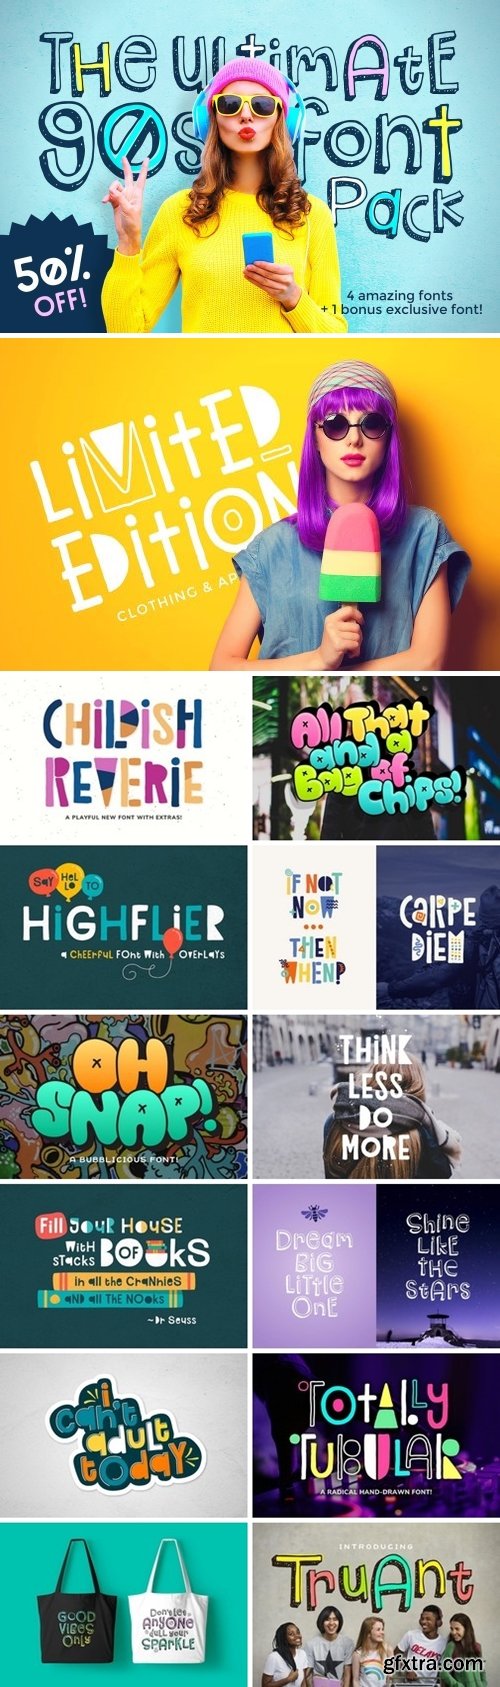 CM - The Ultimate 90s Font Pack 1570114